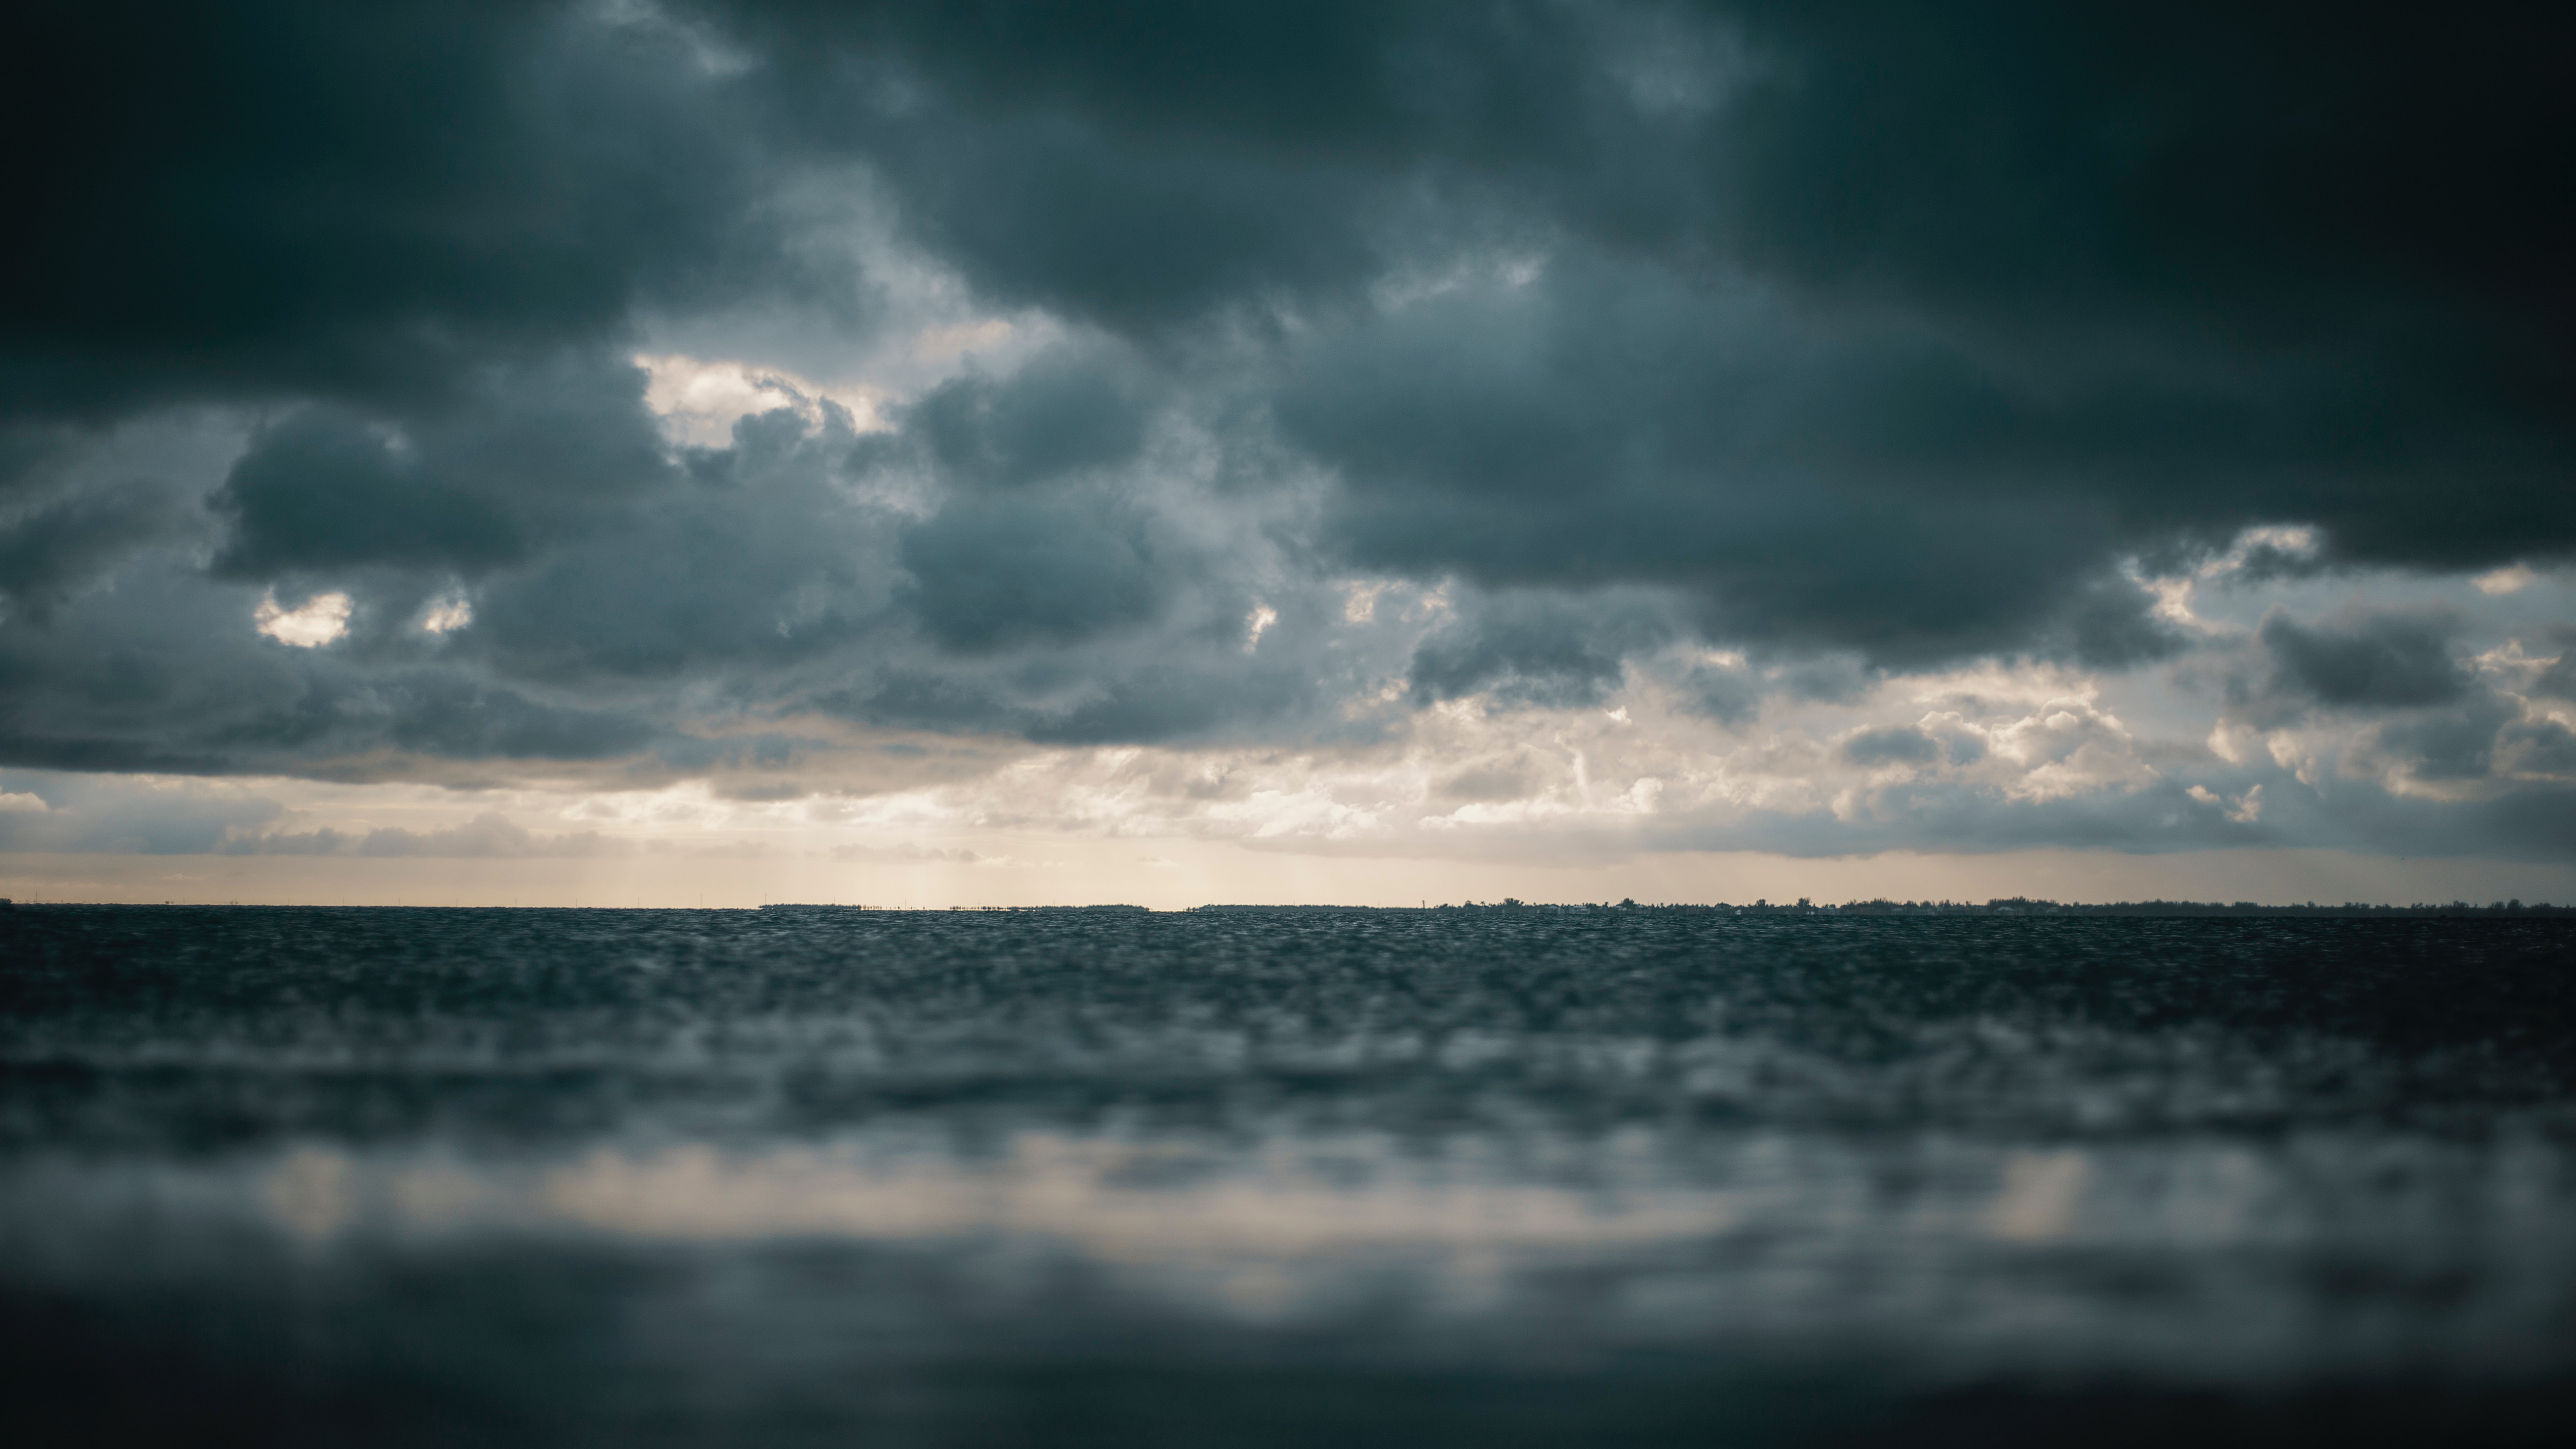 Body of water with dark clouds overhead